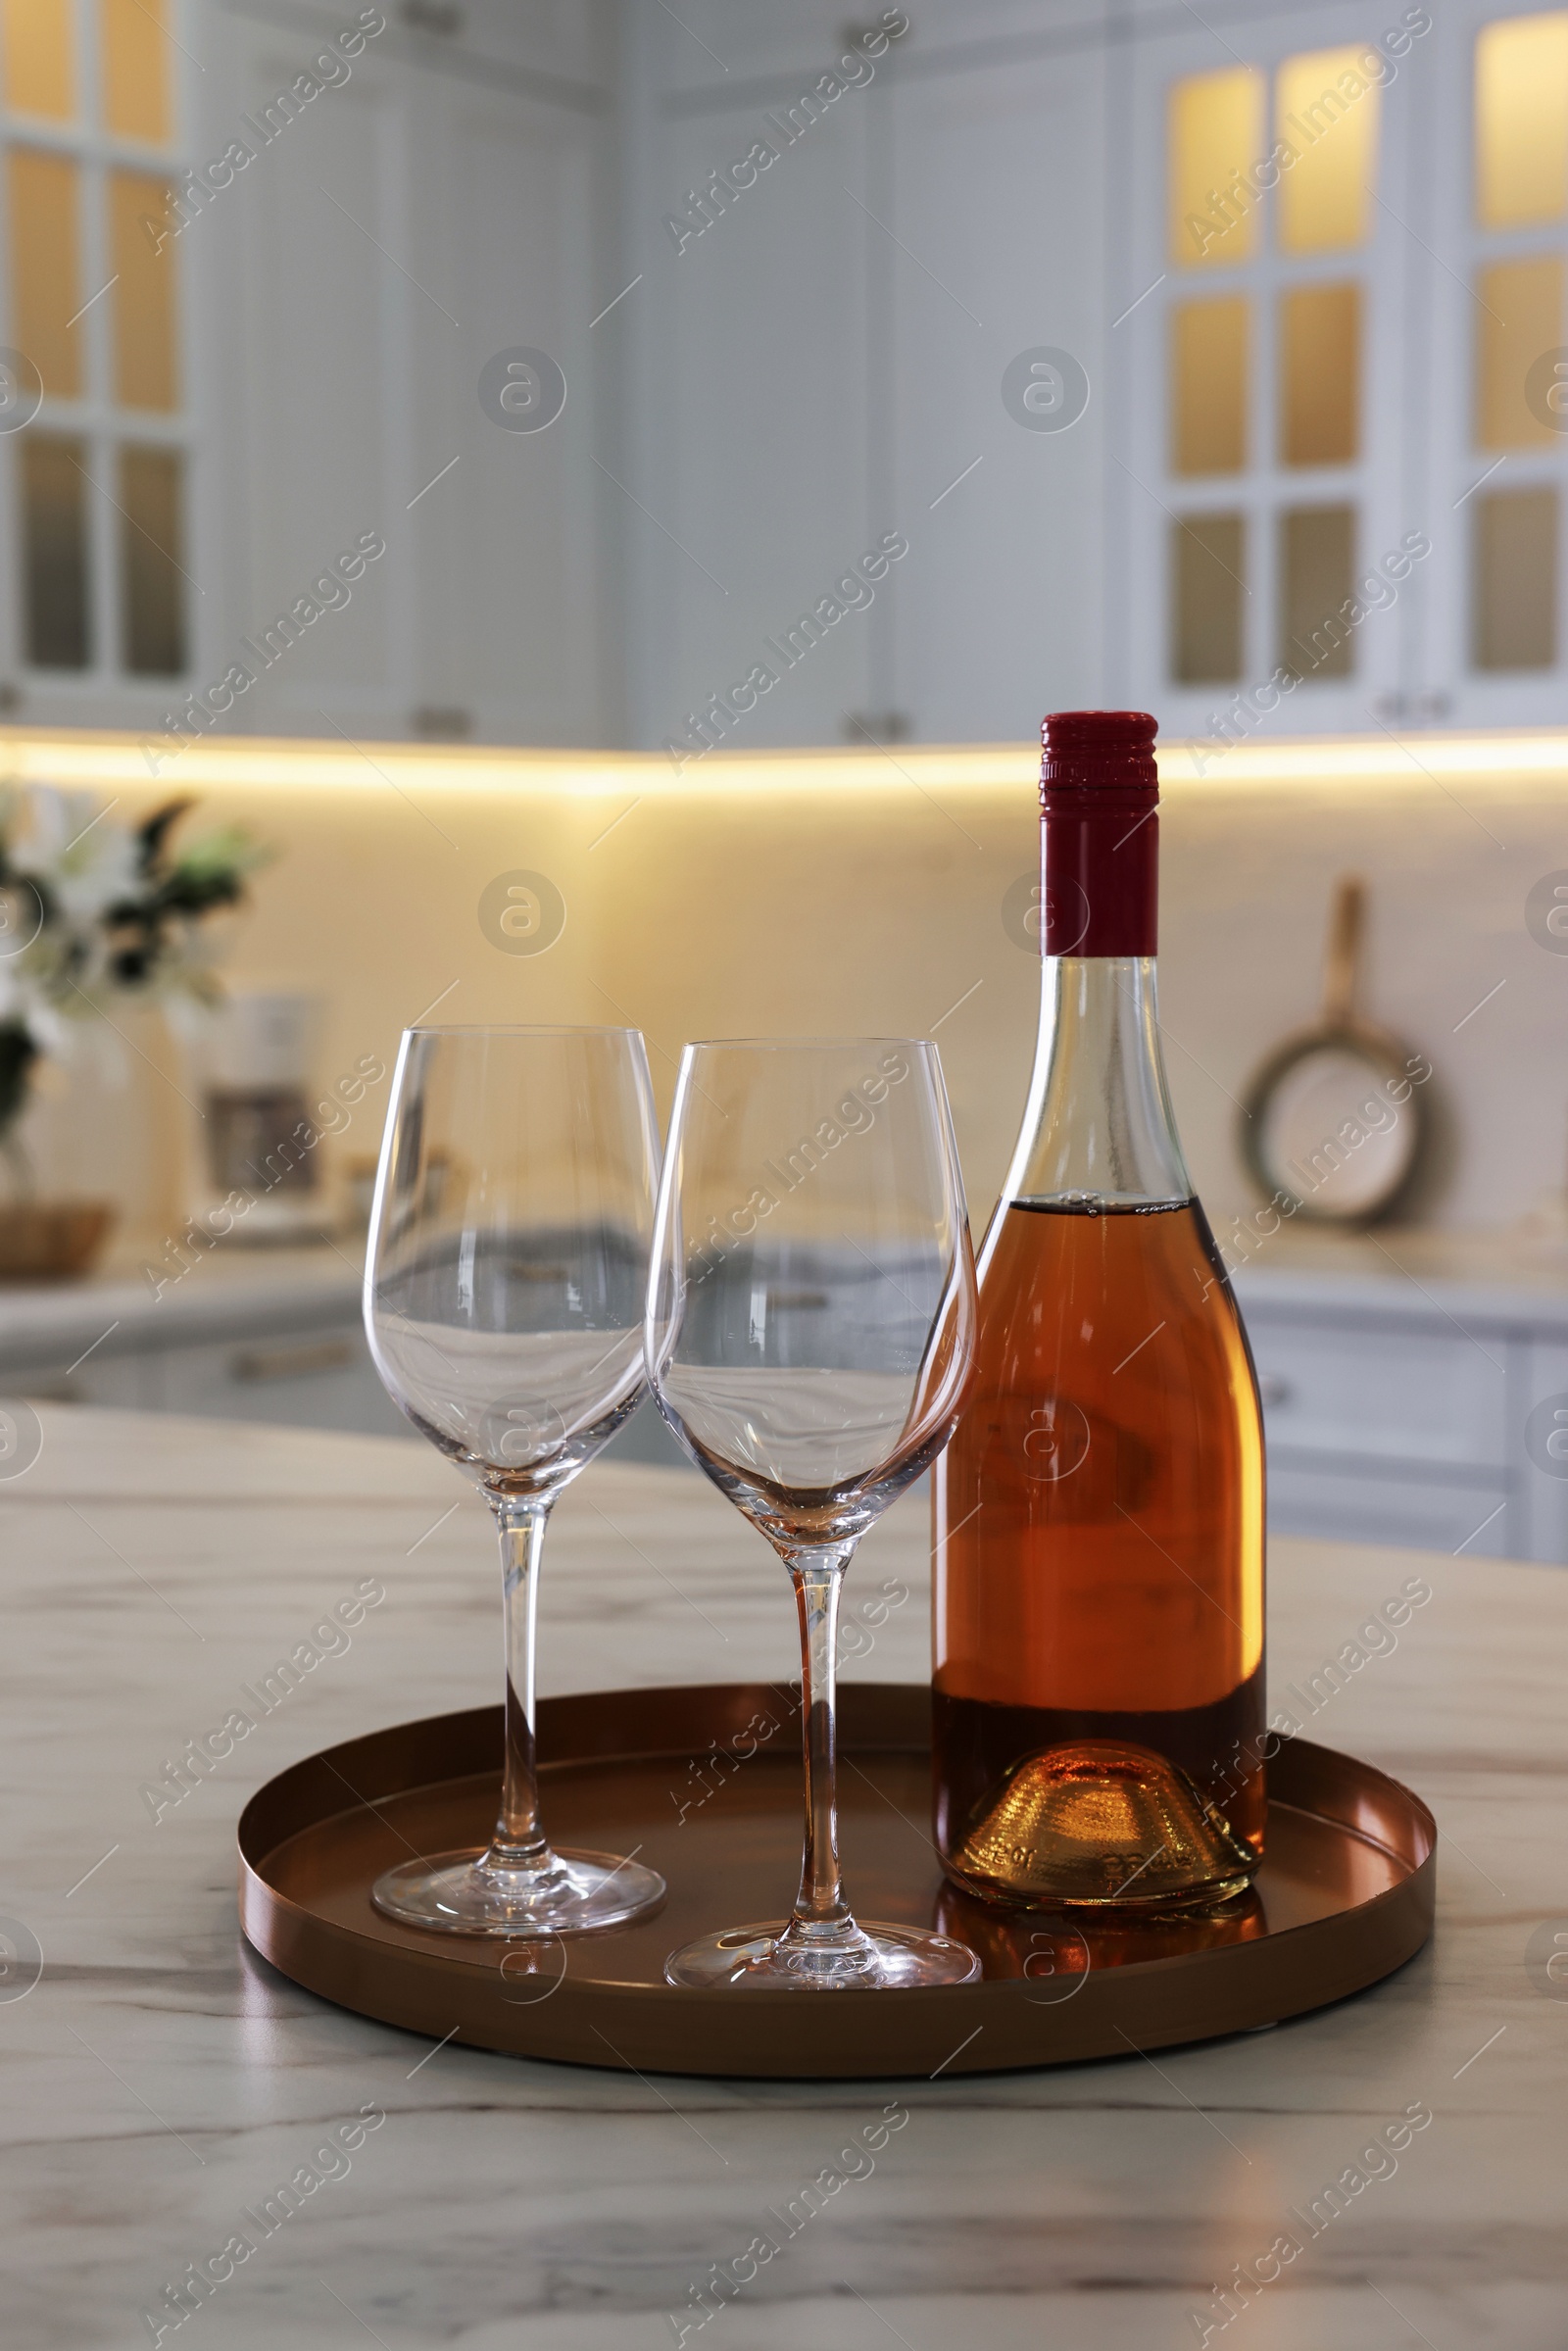 Photo of Bottle and glasses on white marble table in kitchen. Luxury interior